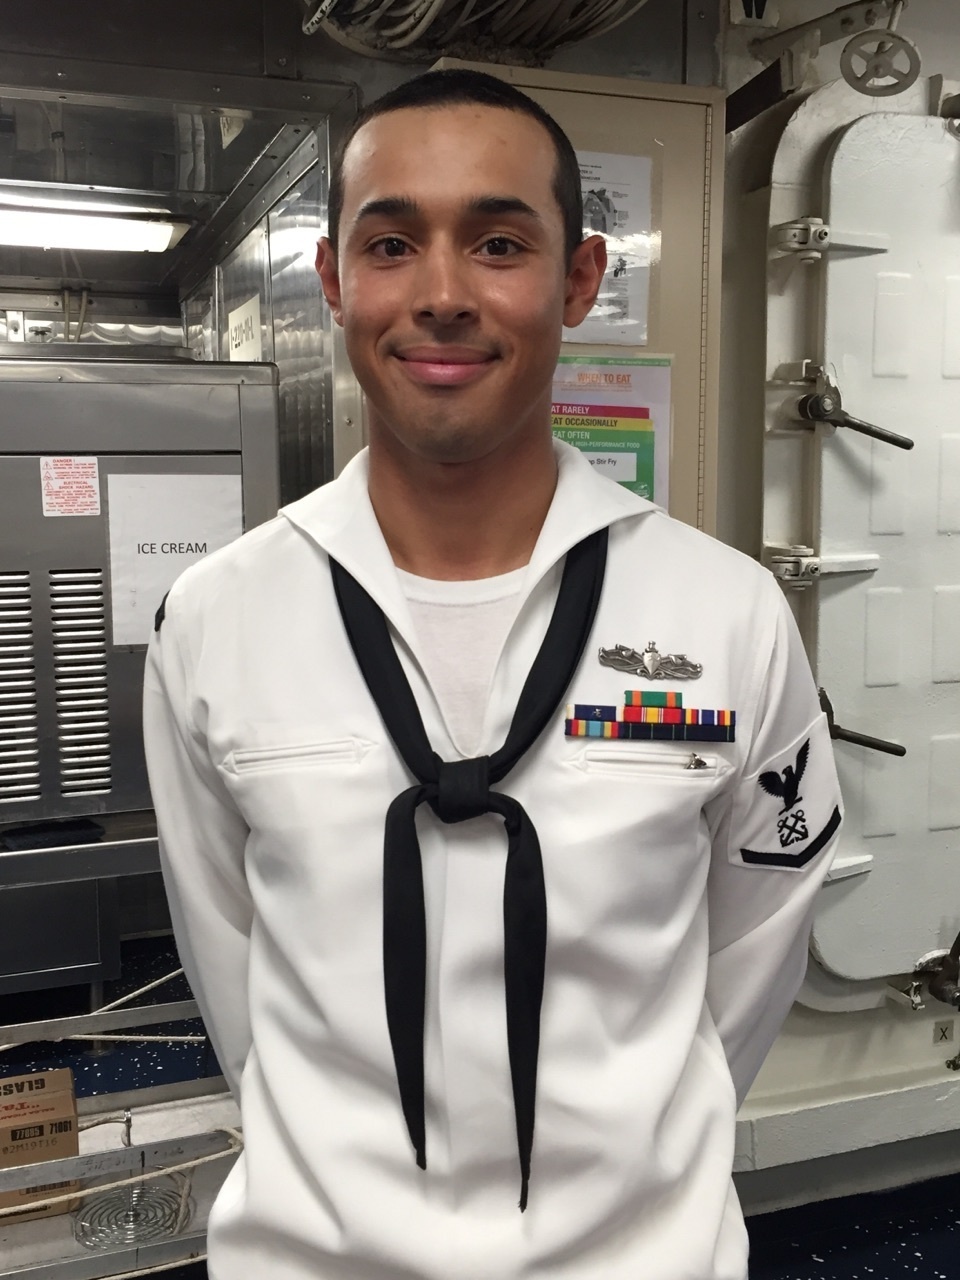 USS Barry Sailors Take Pride in Service, Friendships